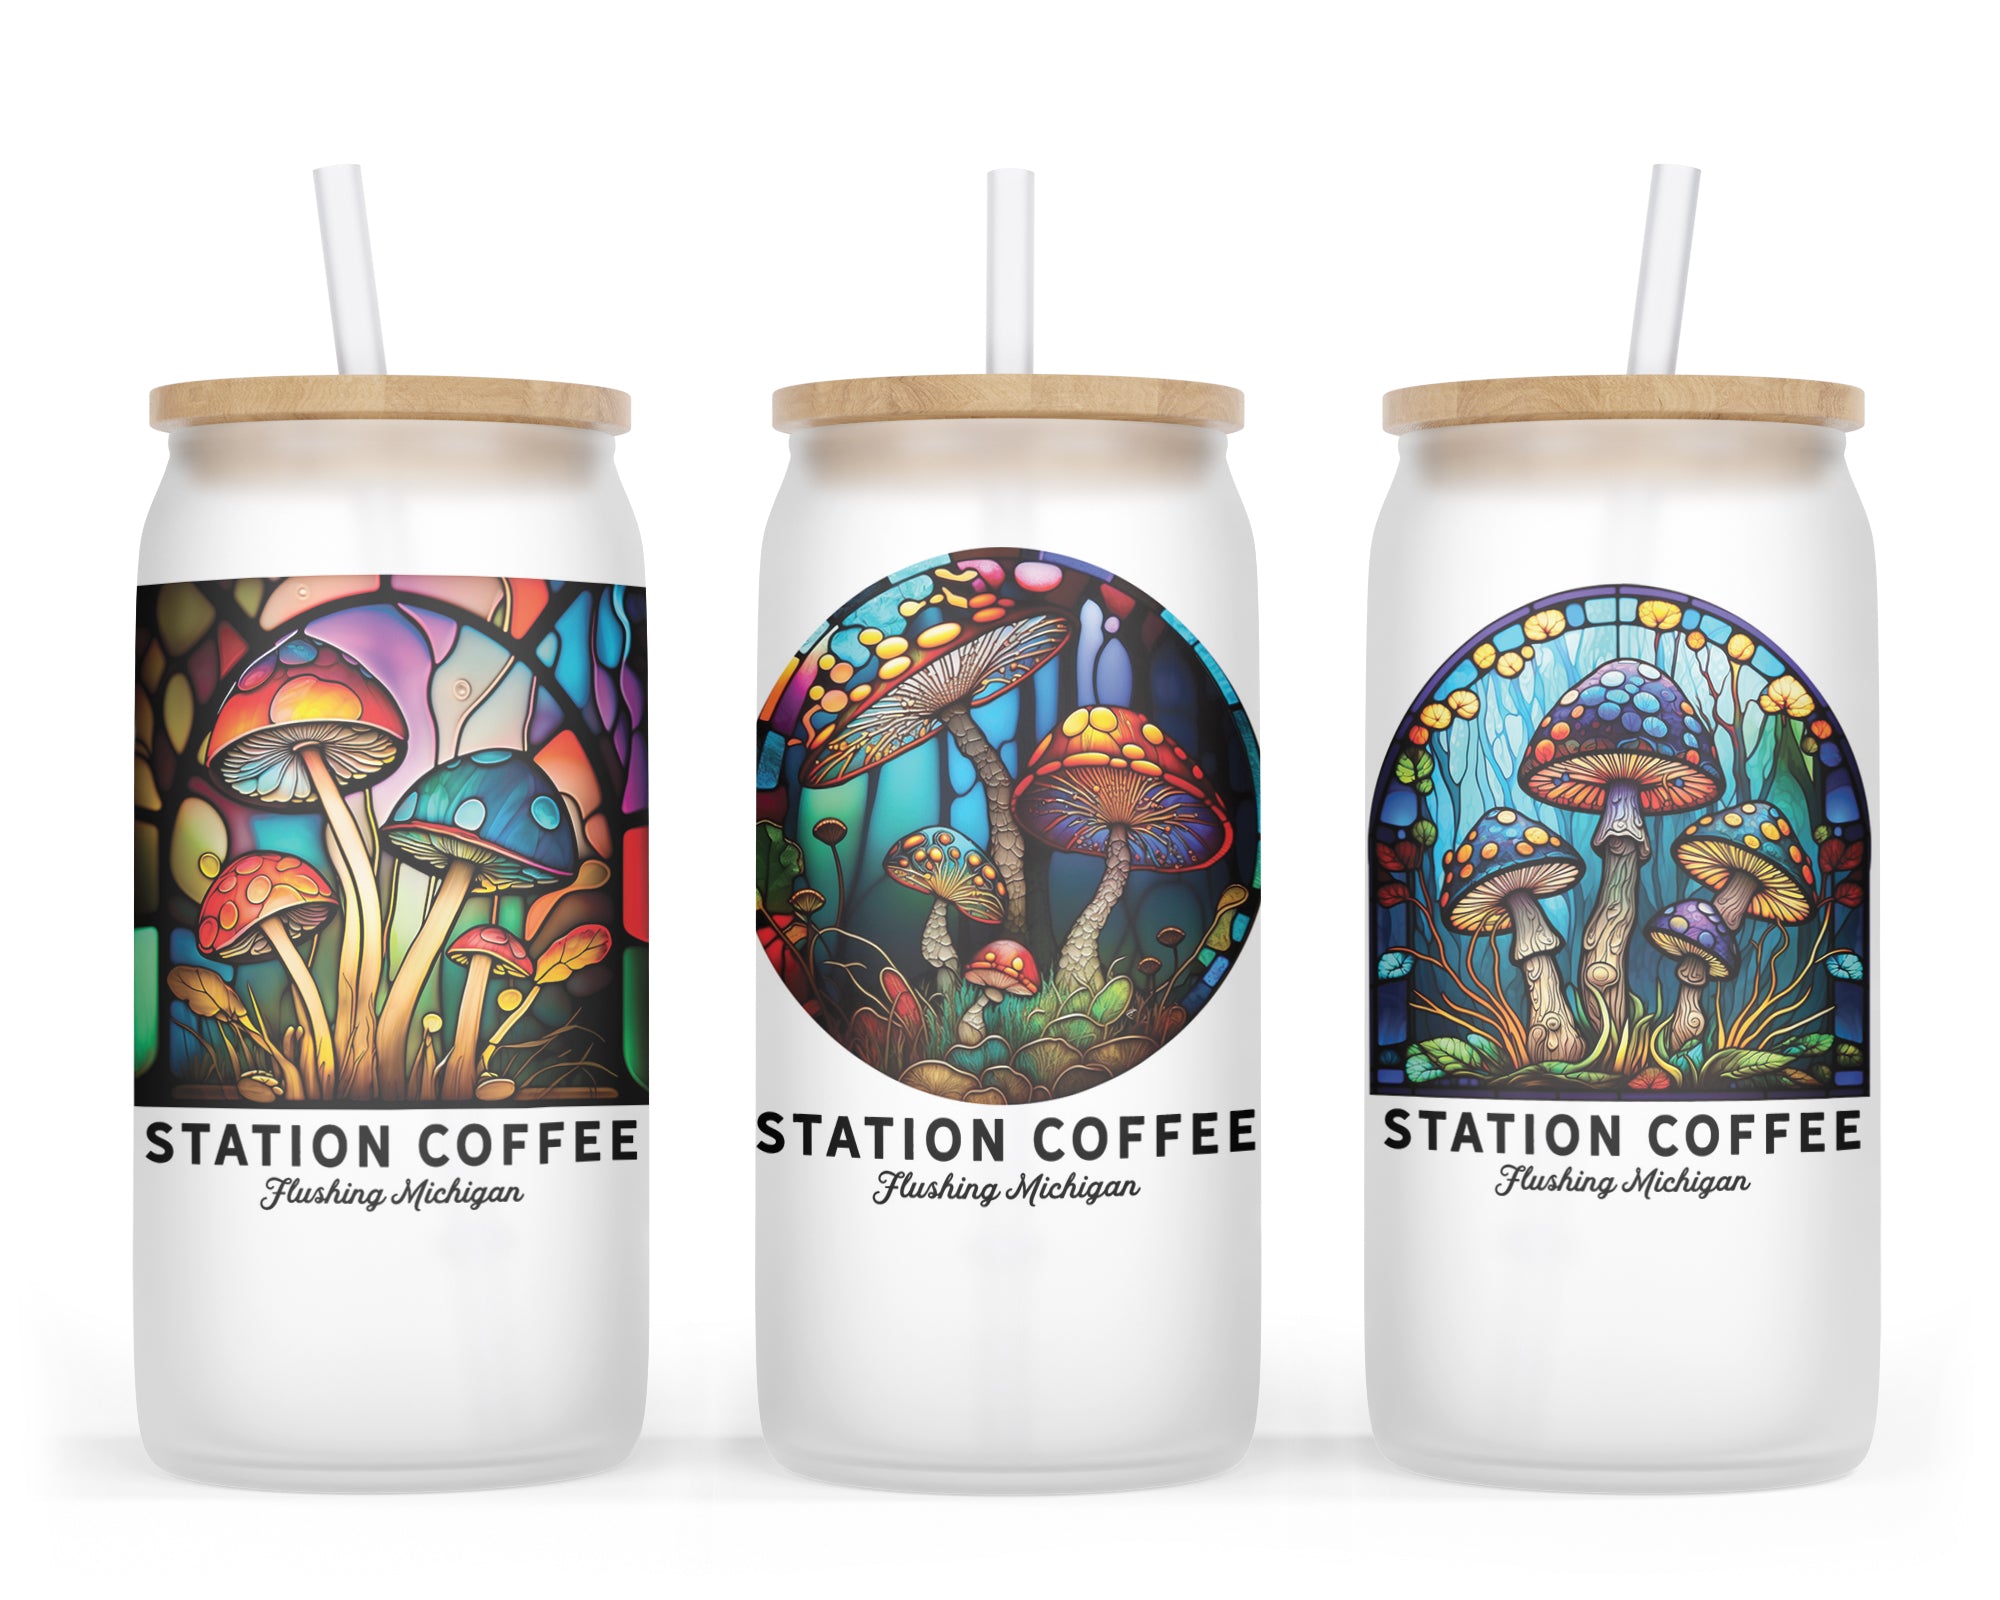 Dome Stained Glass Mushroom Design Tumbler – The Station Coffee Co